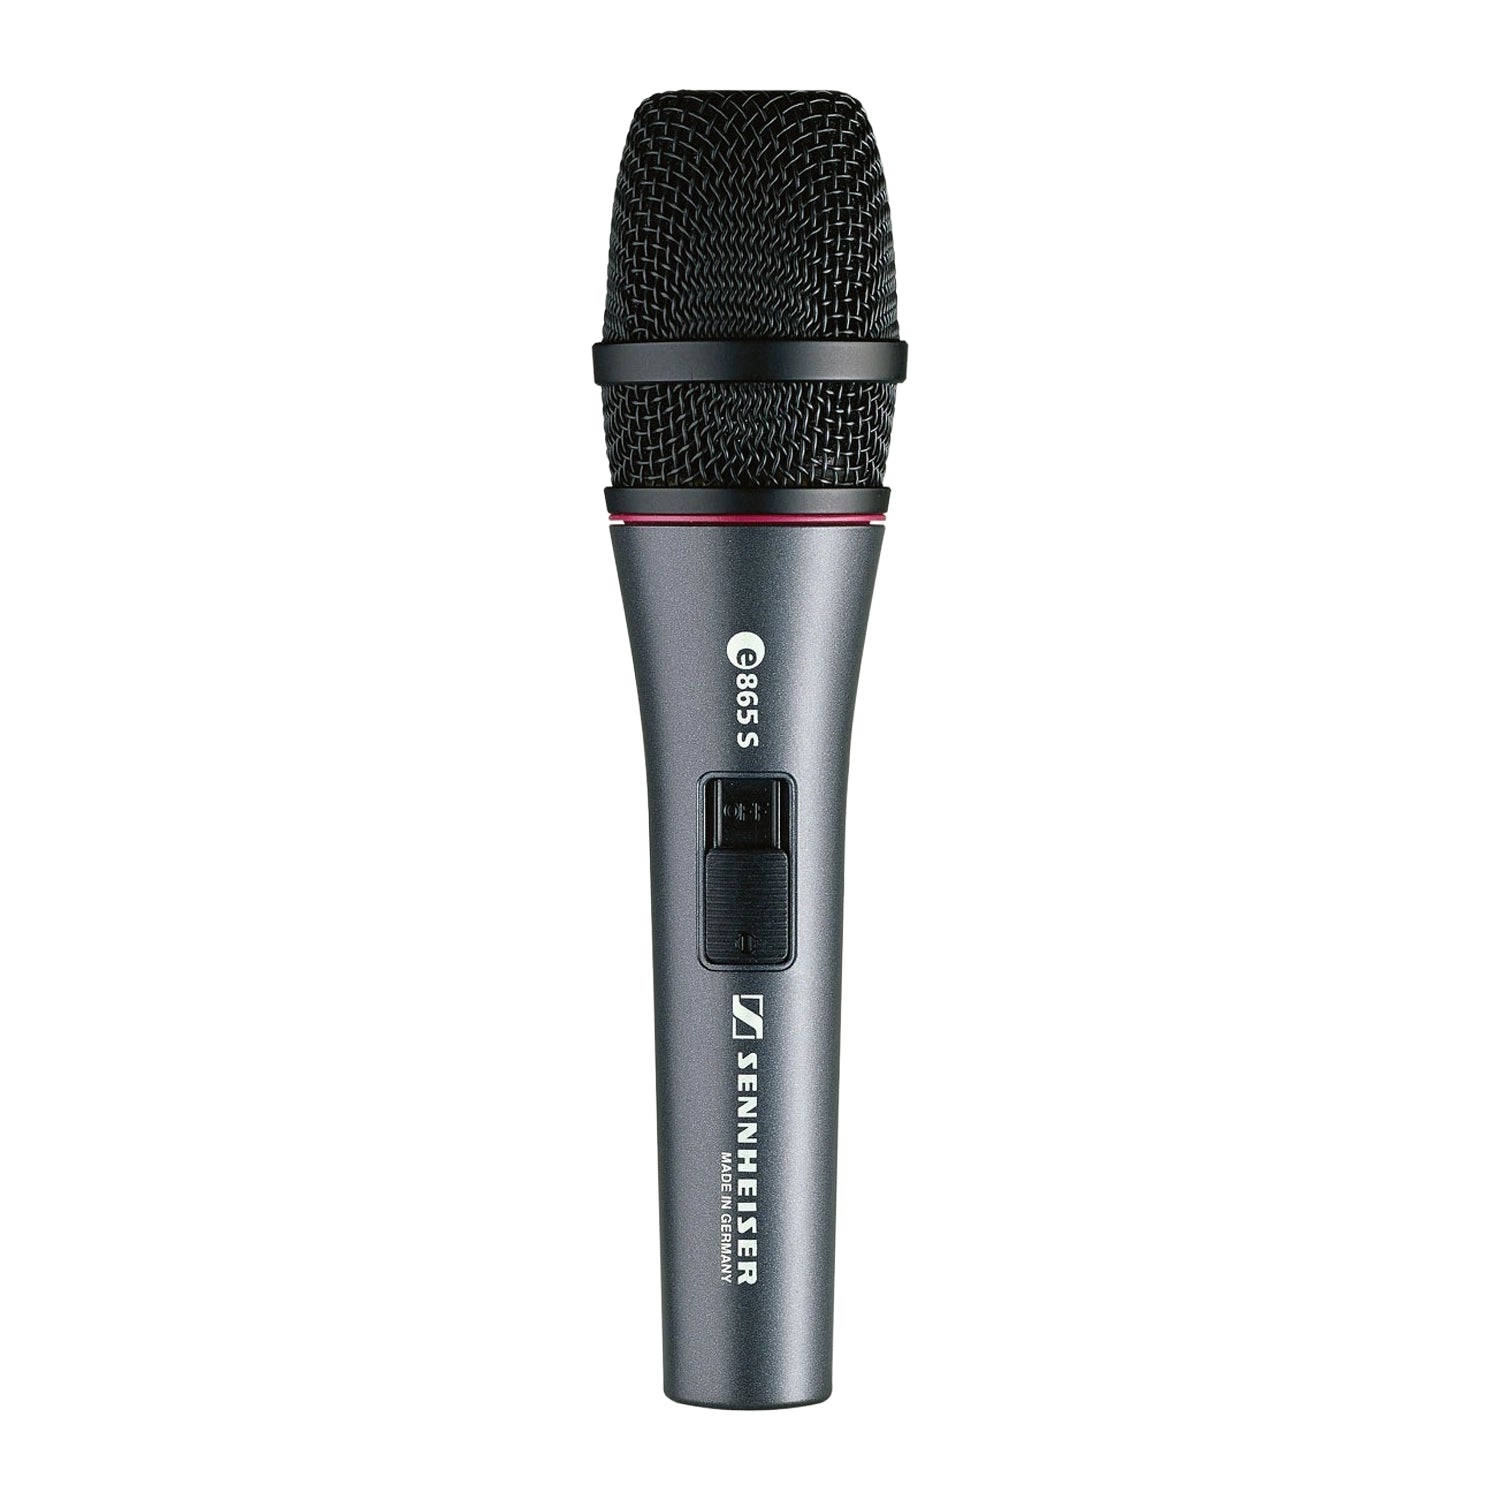 Sennheiser e 865S Handheld Supercardioid Condenser Microphone with On/Off Switch